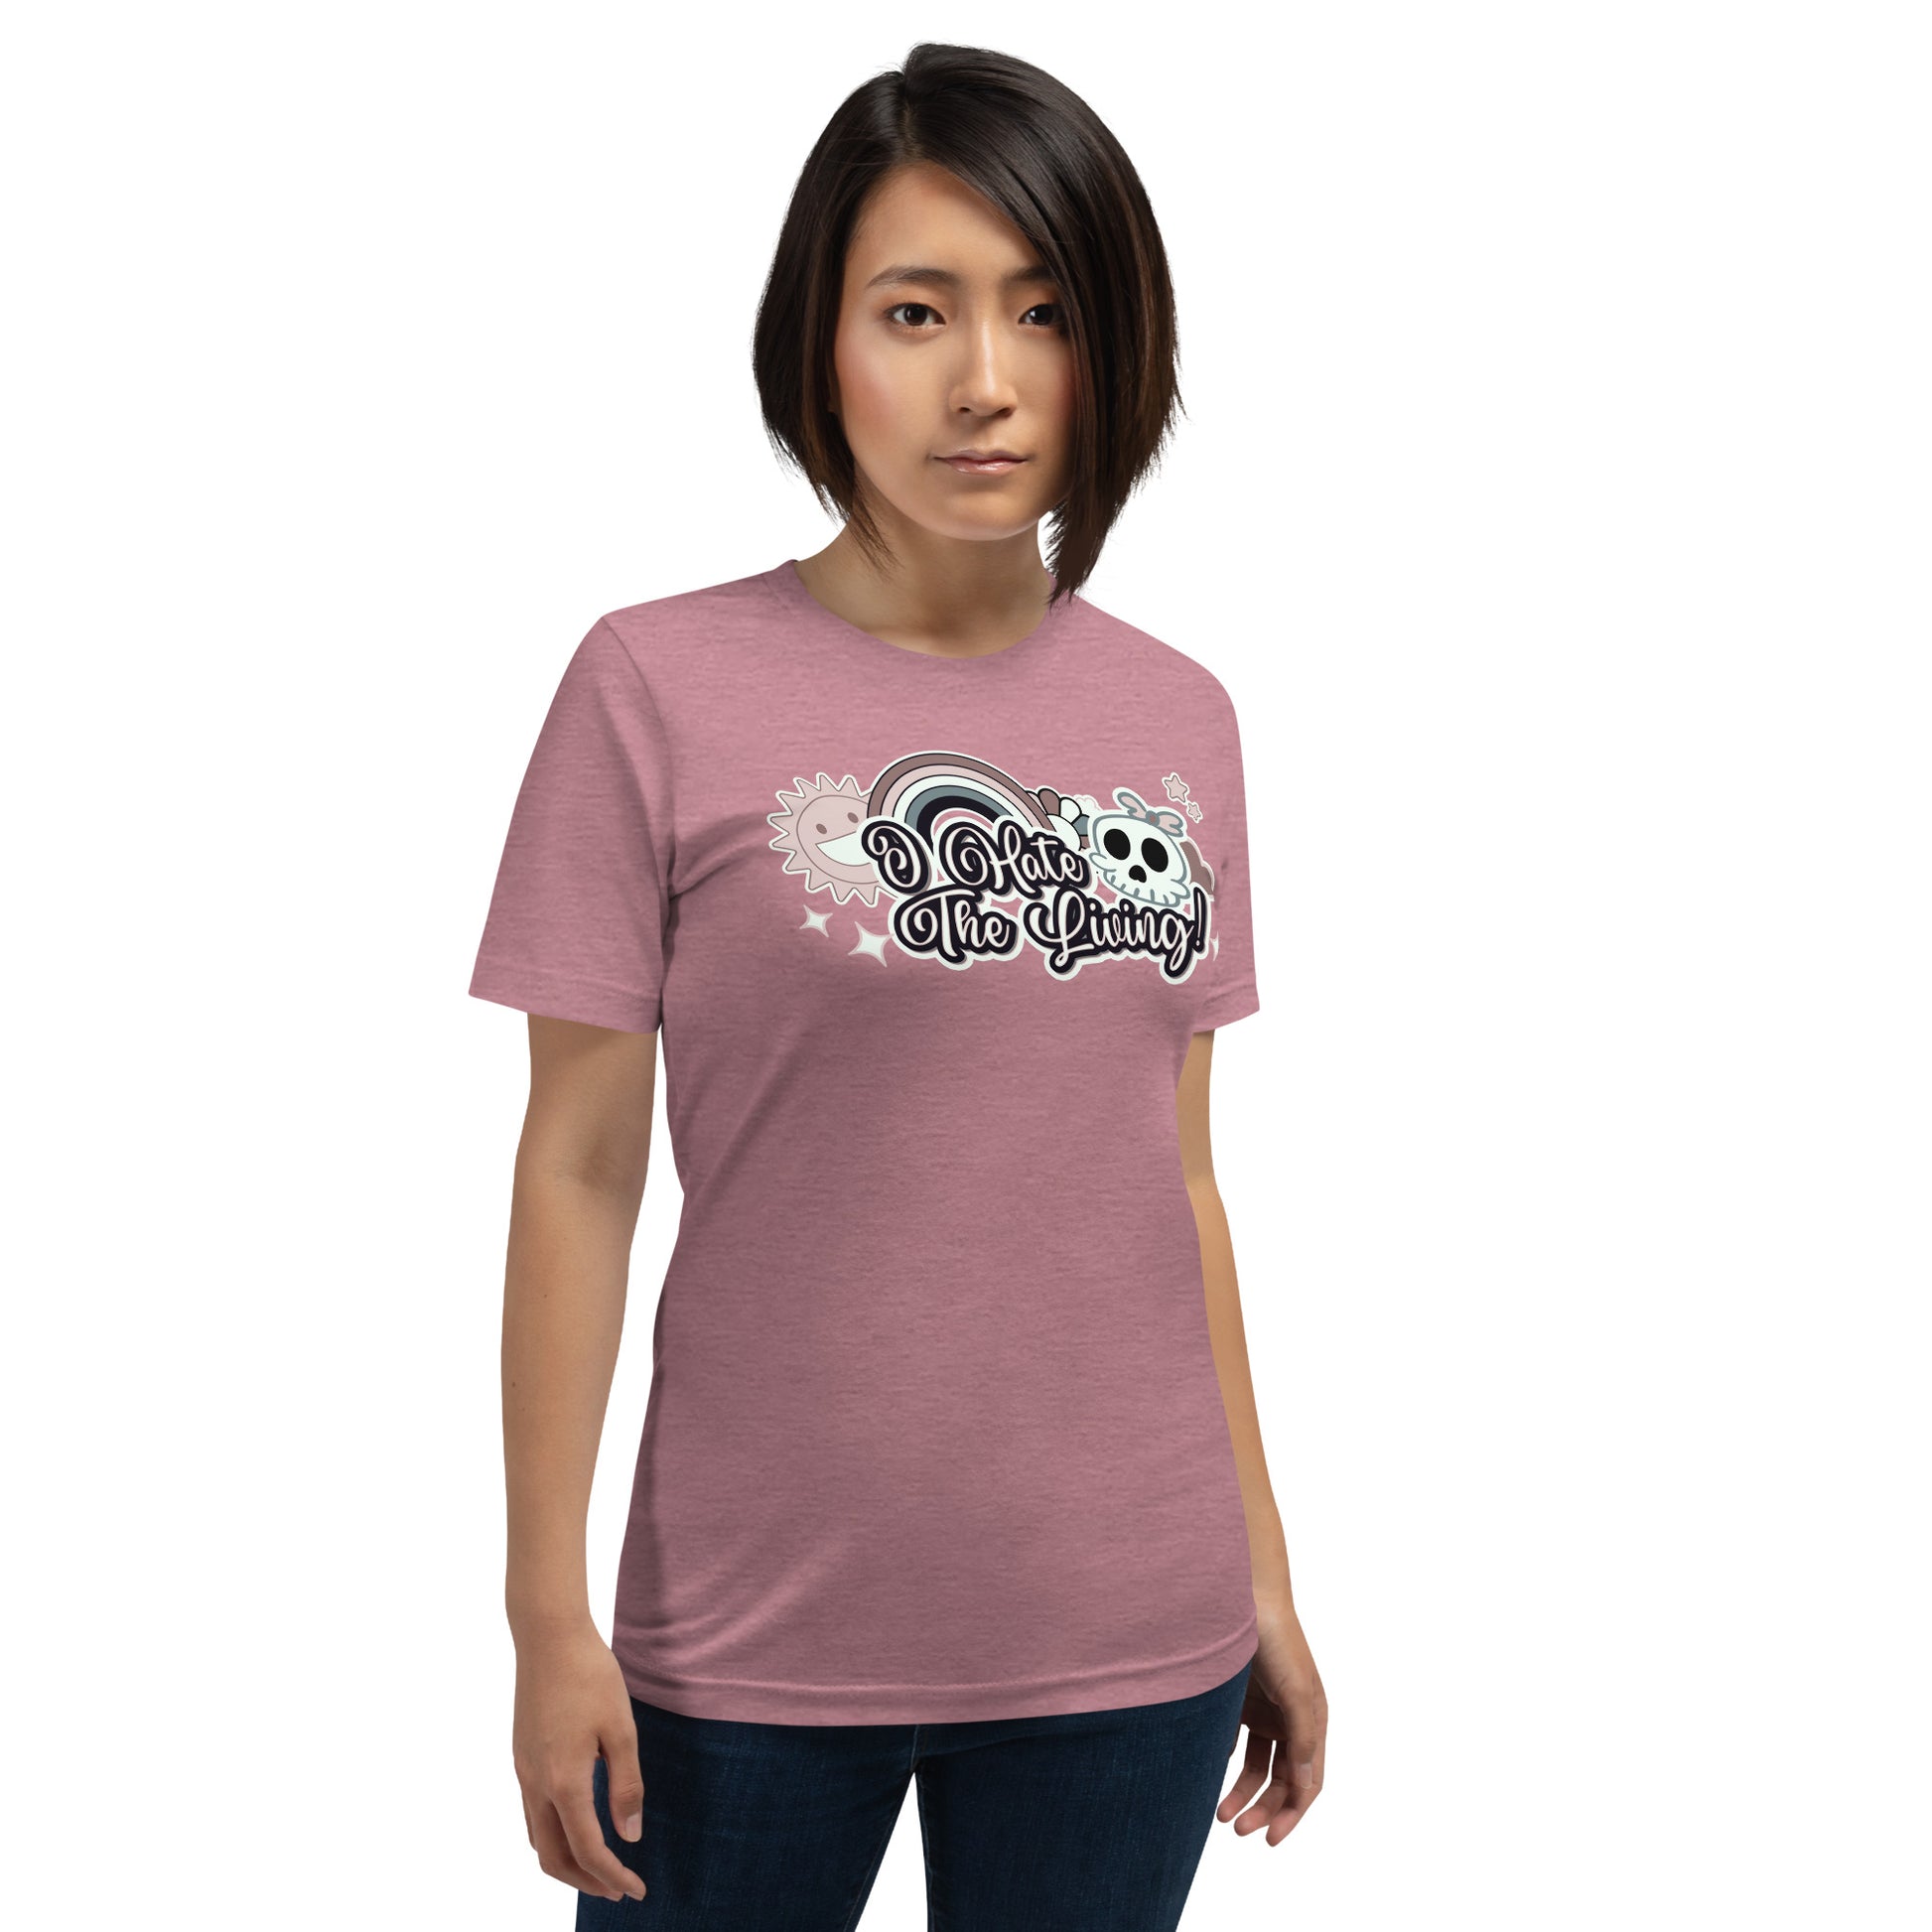 I Hate the Living Heather Pink Unisex Adult T-shirt from Axolotl Apparel